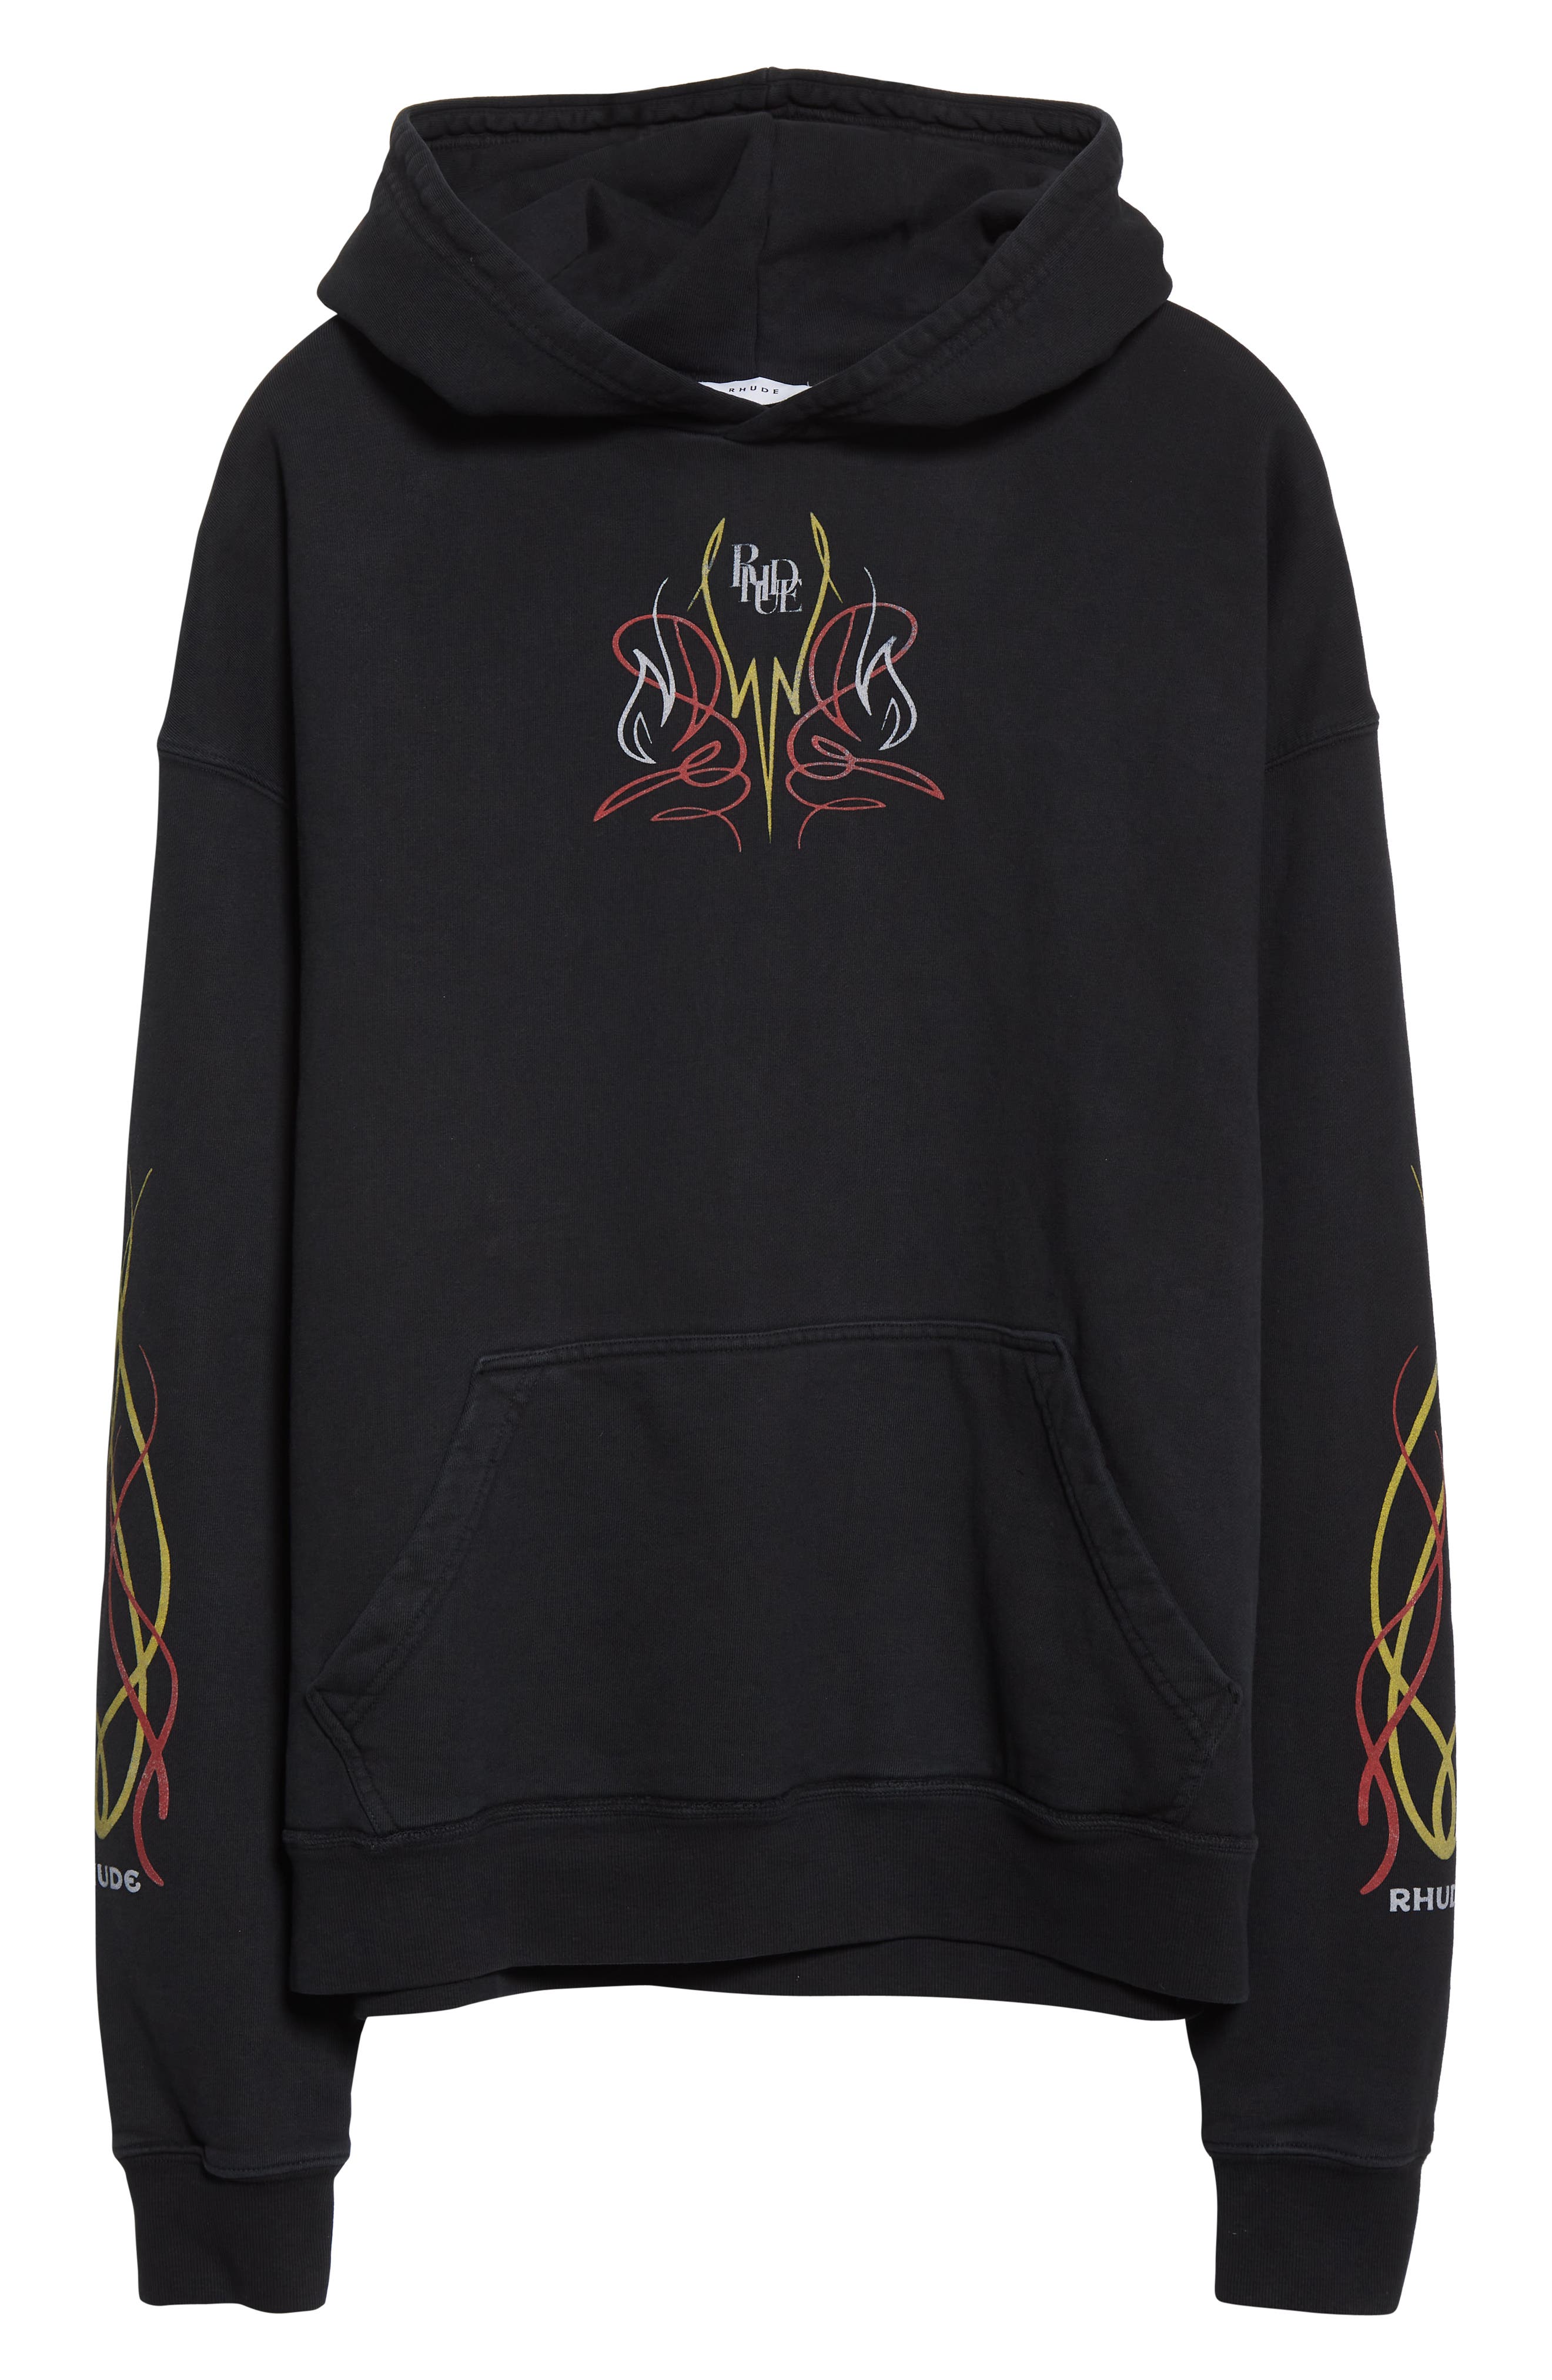 Rhude Men's Oversize Hot Rod Graphic Hoodie in Black at Nordstrom, Size Medium